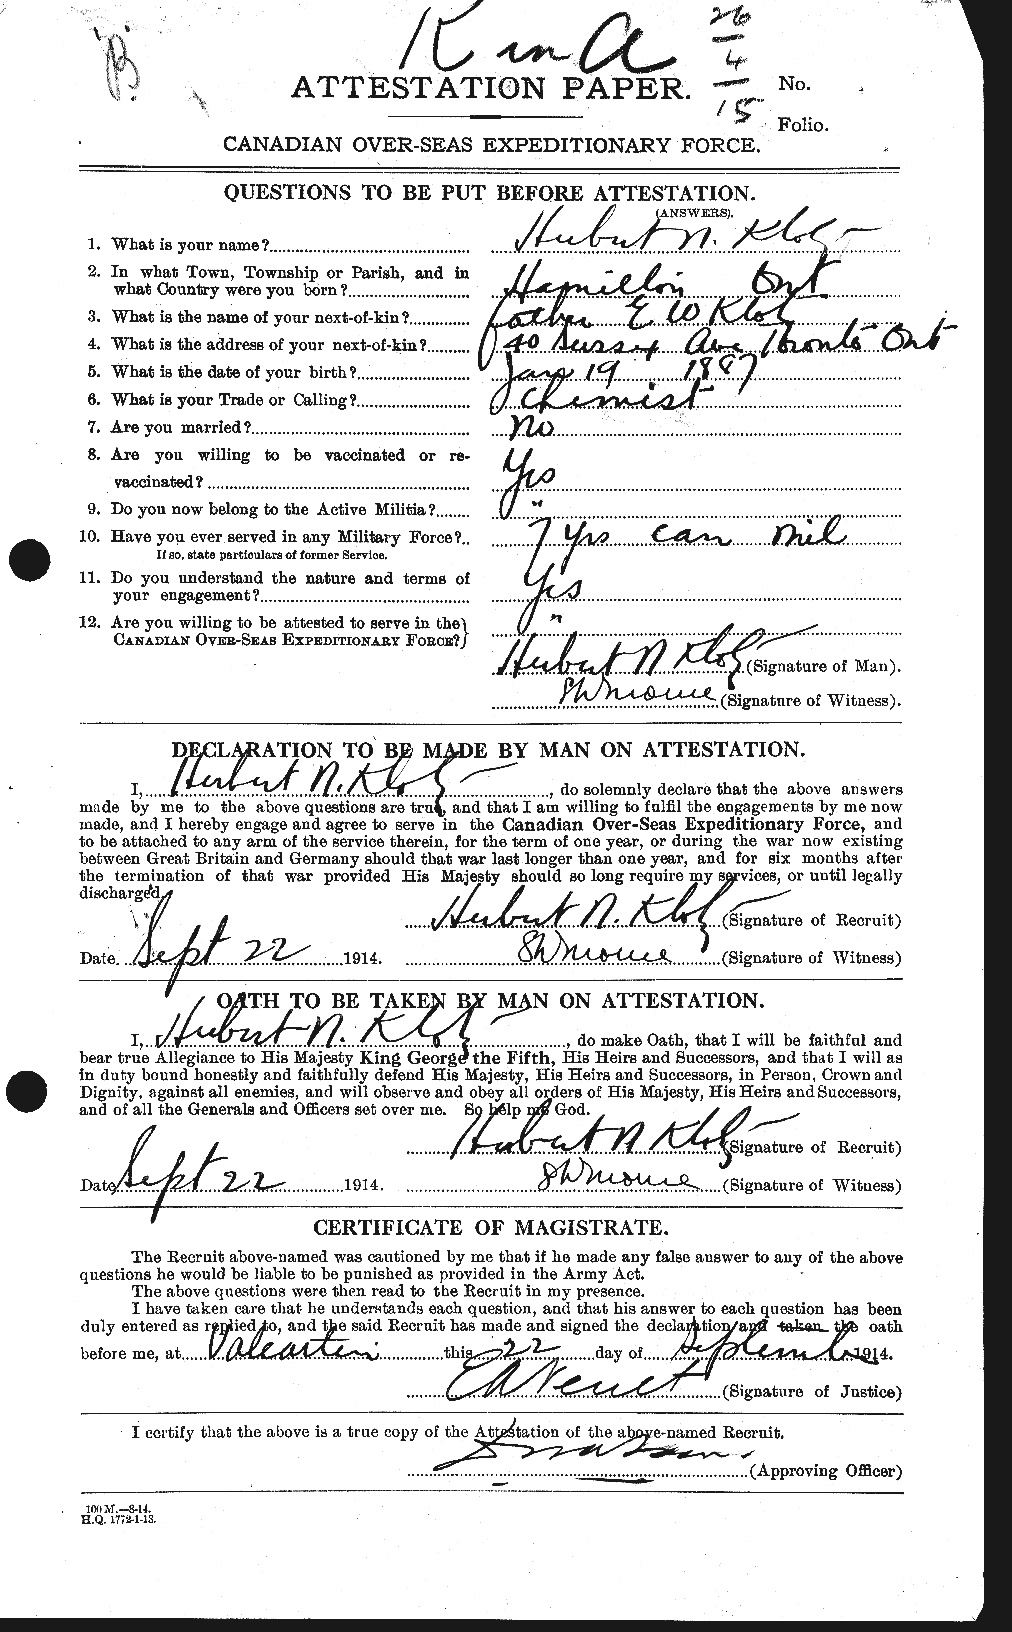 Personnel Records of the First World War - CEF 440532a